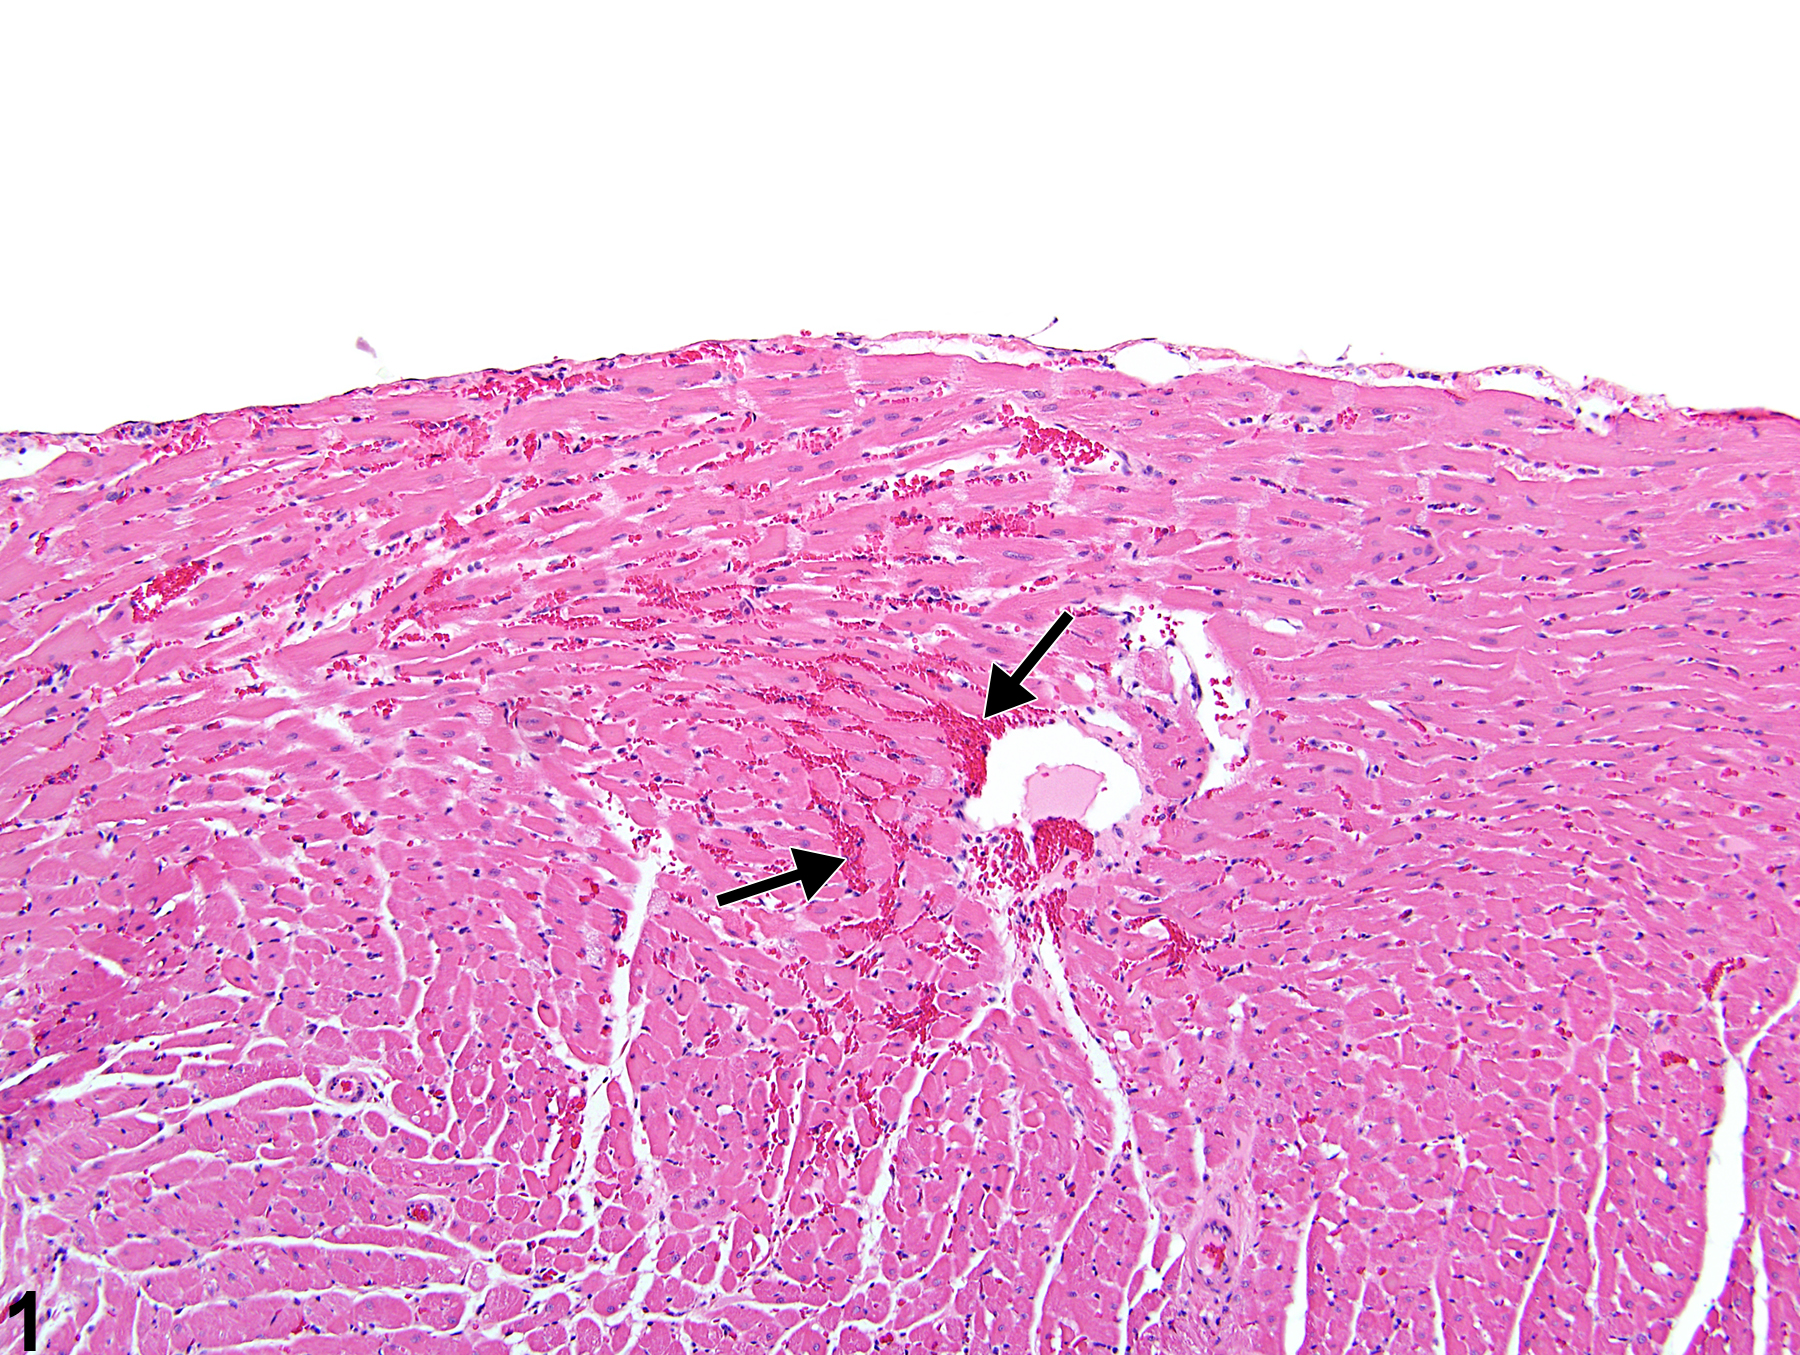 Image of hemorrhage in the heart from a male F344/N rat in a acute study